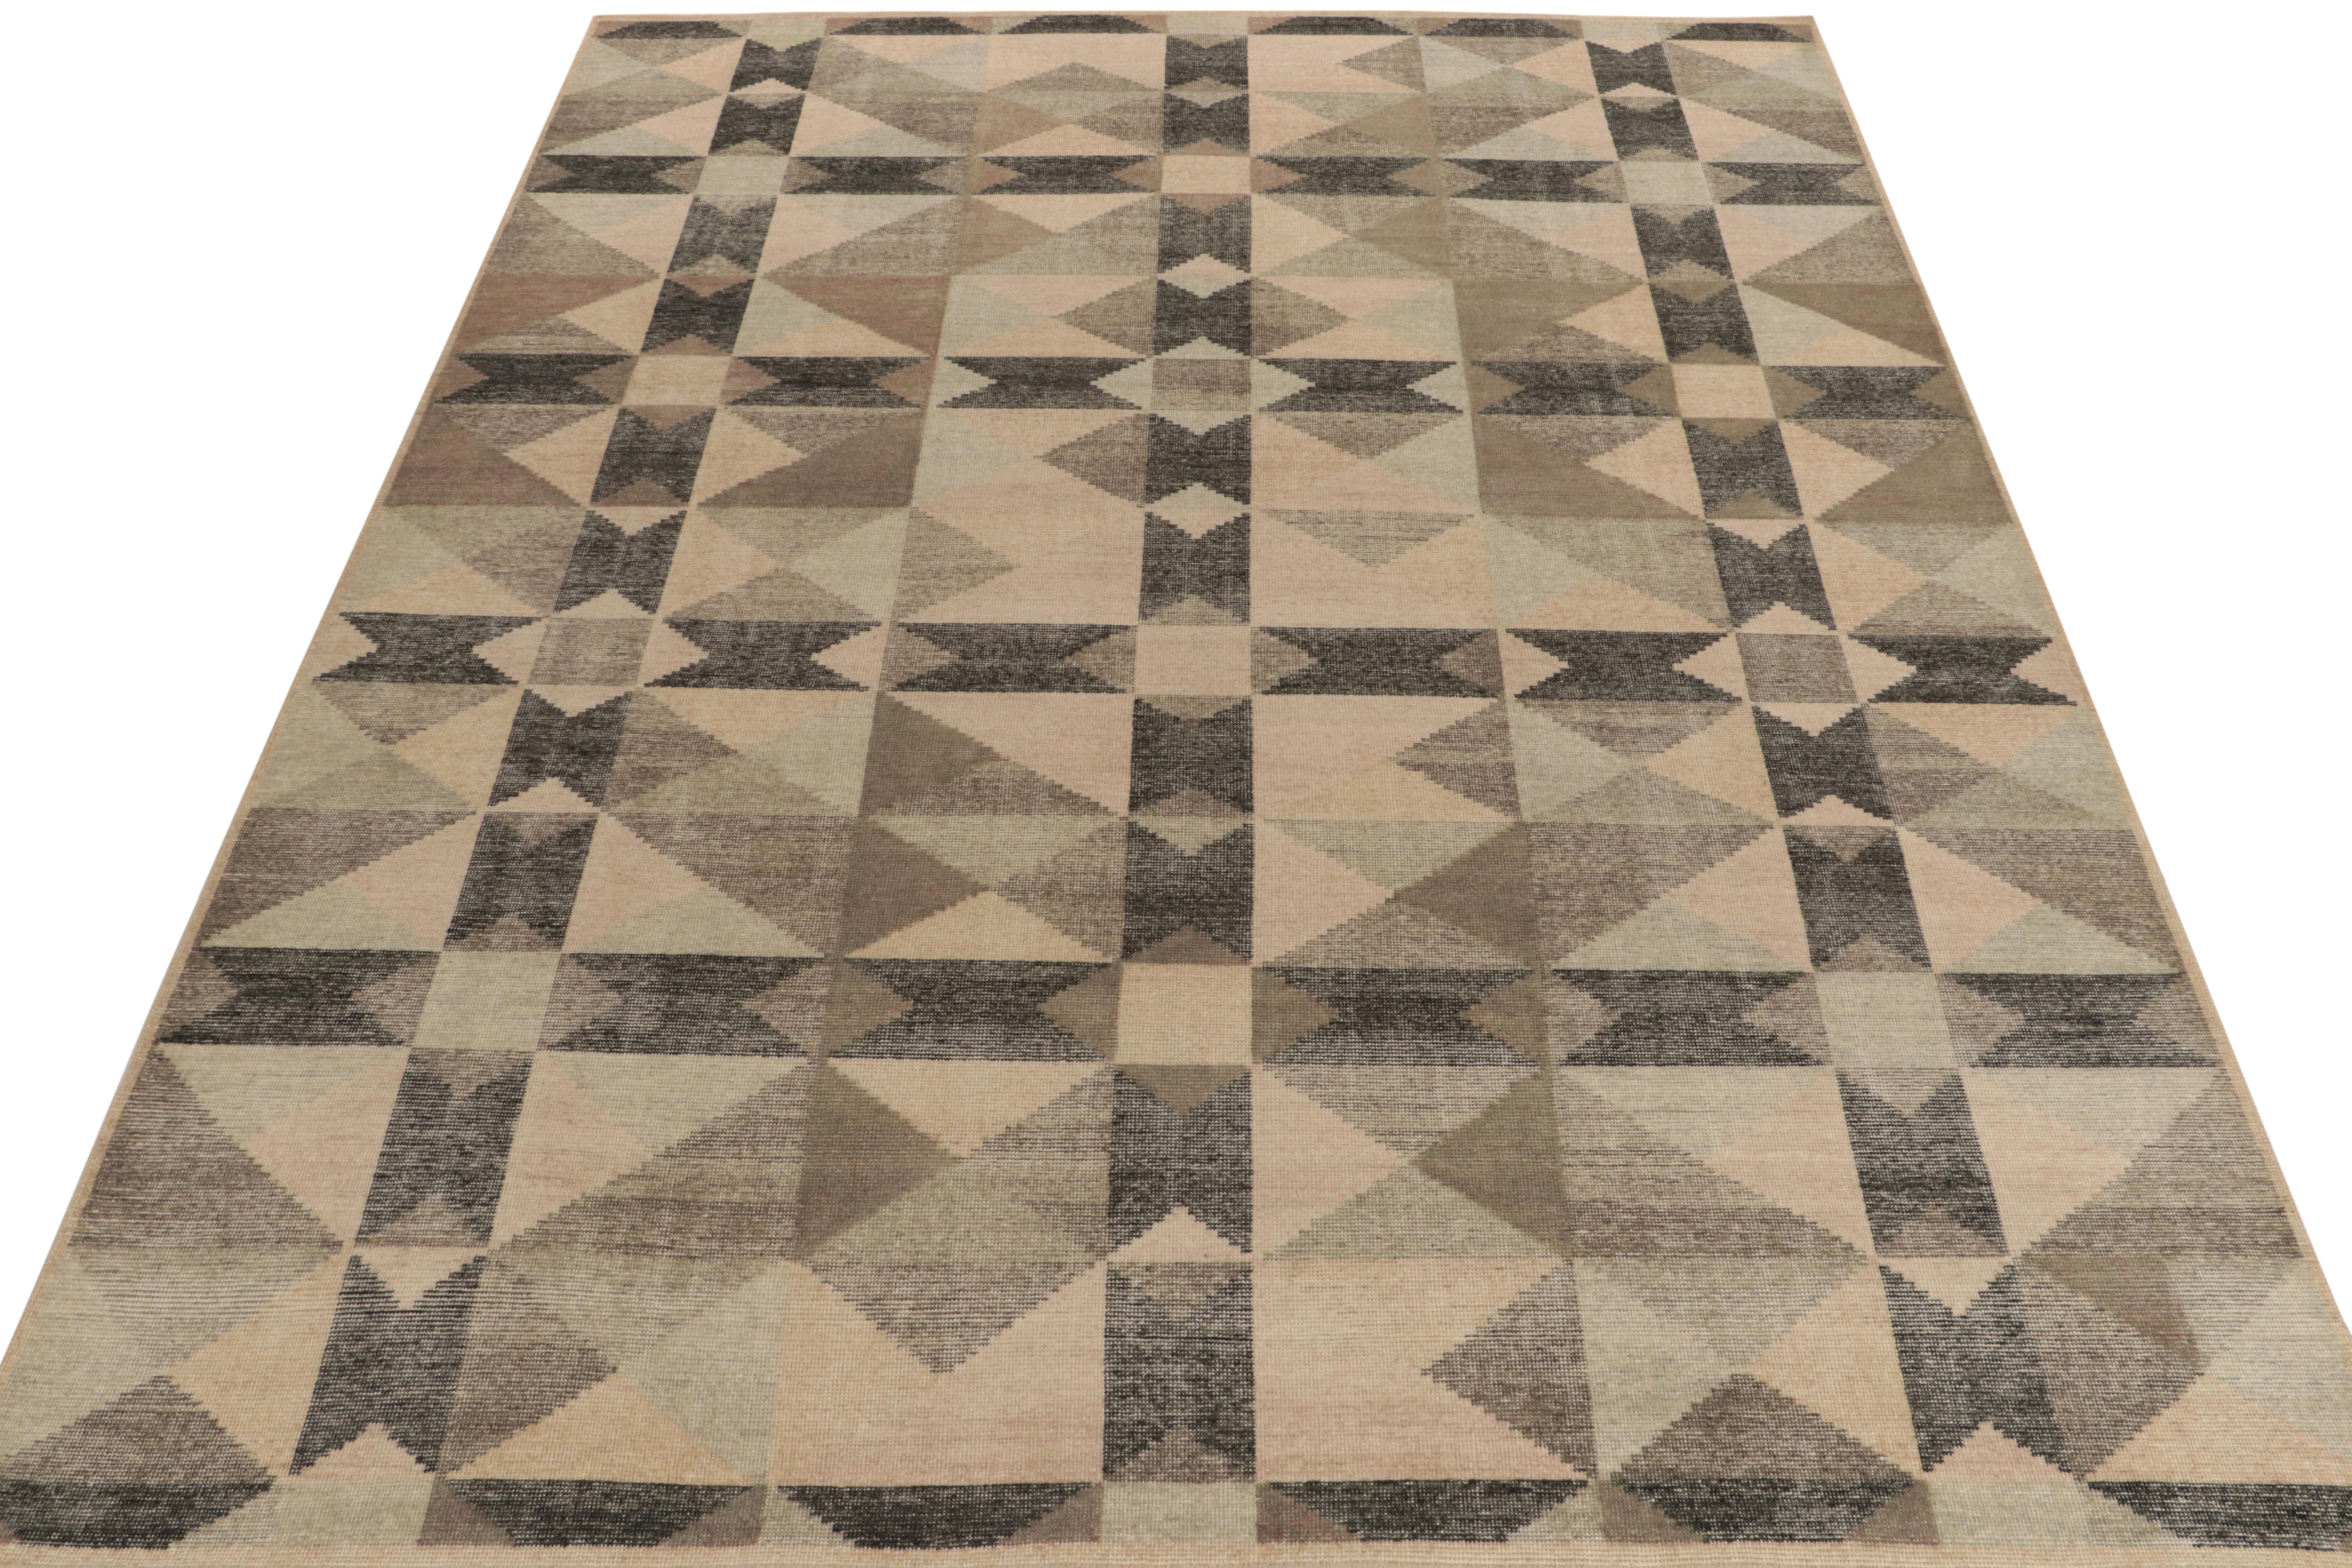 Hand-knotted in wool, an elegant piece conceptualizing a brilliant take on modern geometry. Exemplified in this 9x12 edition, this rug design features a uniform geometric pattern—sitting handsomely in muted shades of beige, brown, black & gray for a